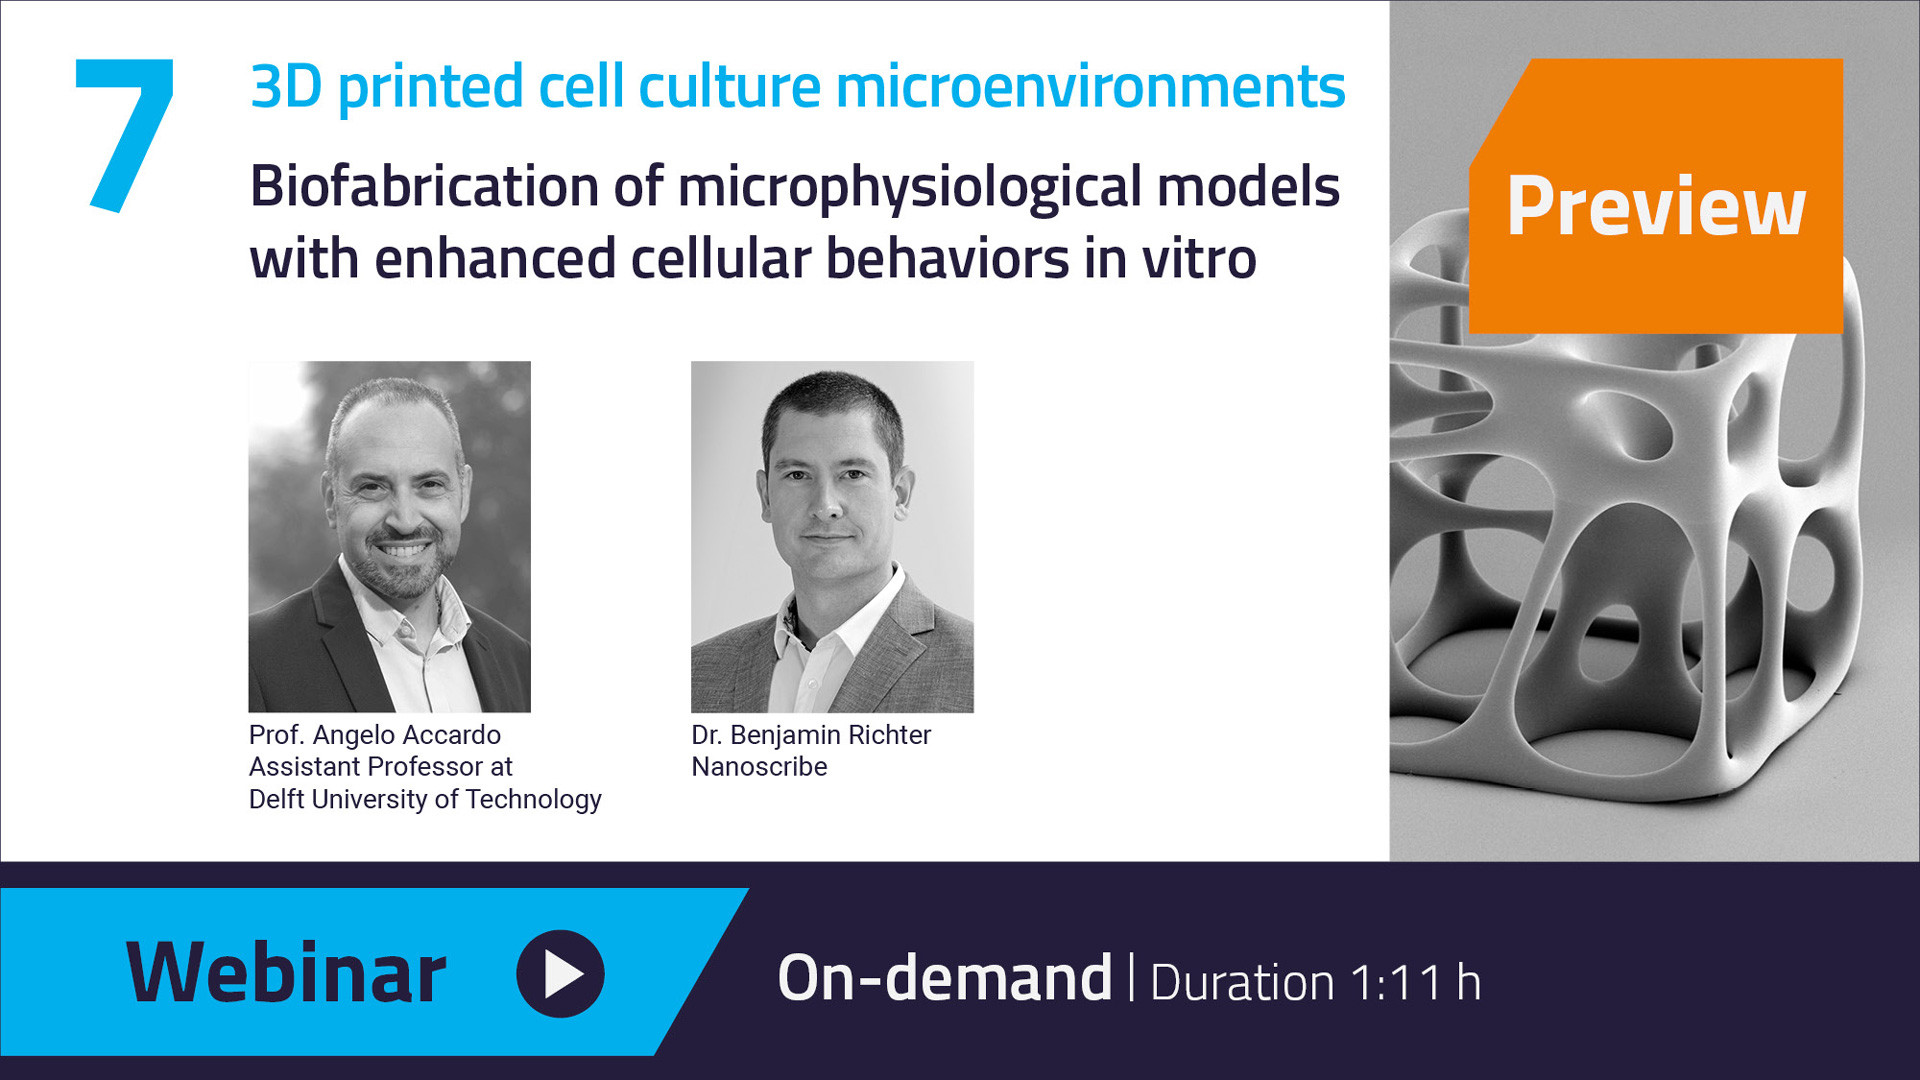 Our Webinar on 3D printed cell culture microenvironments is now available on-demand - watch the webinar here